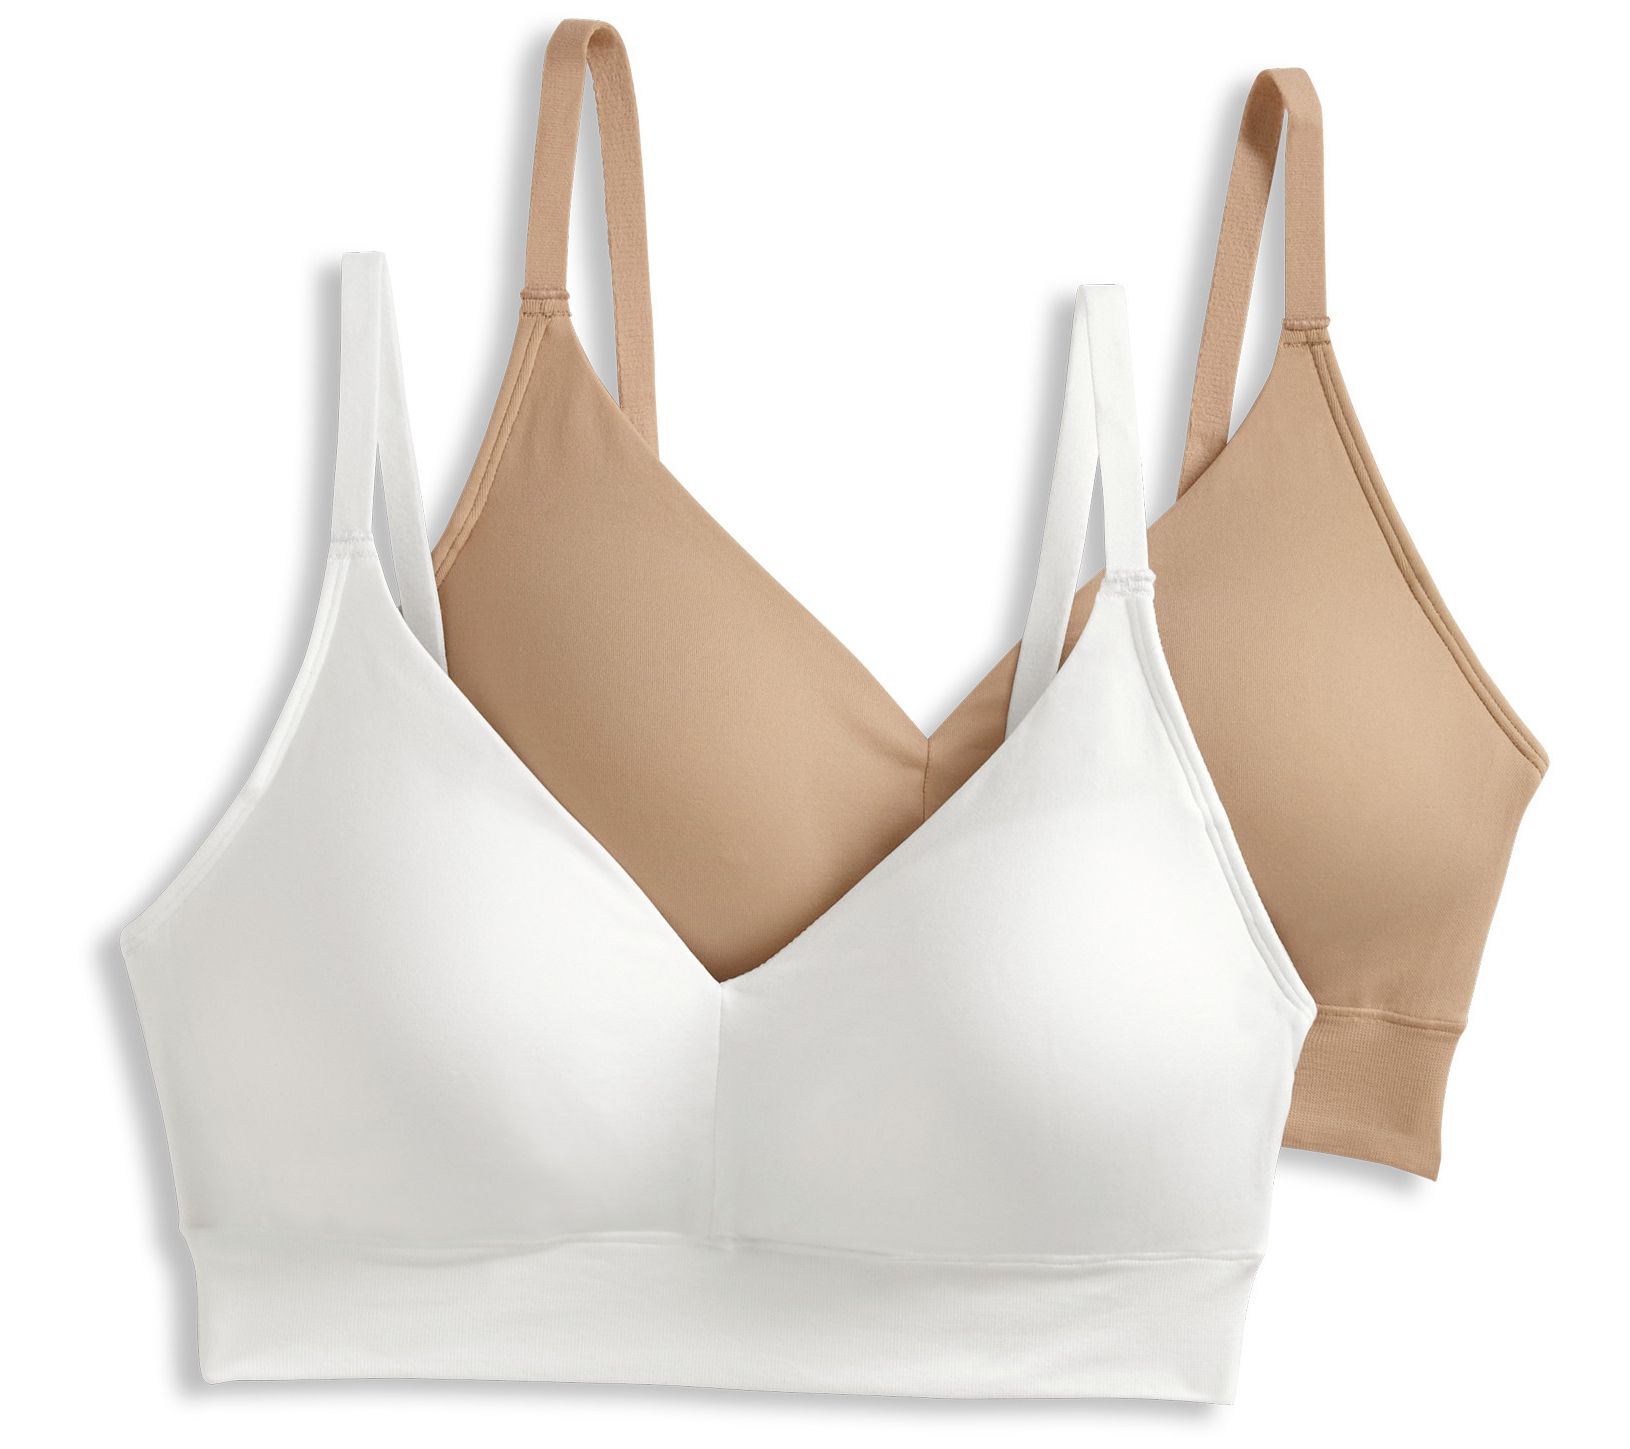 Jockey Forever Fit Soft Molded Cup Bra 